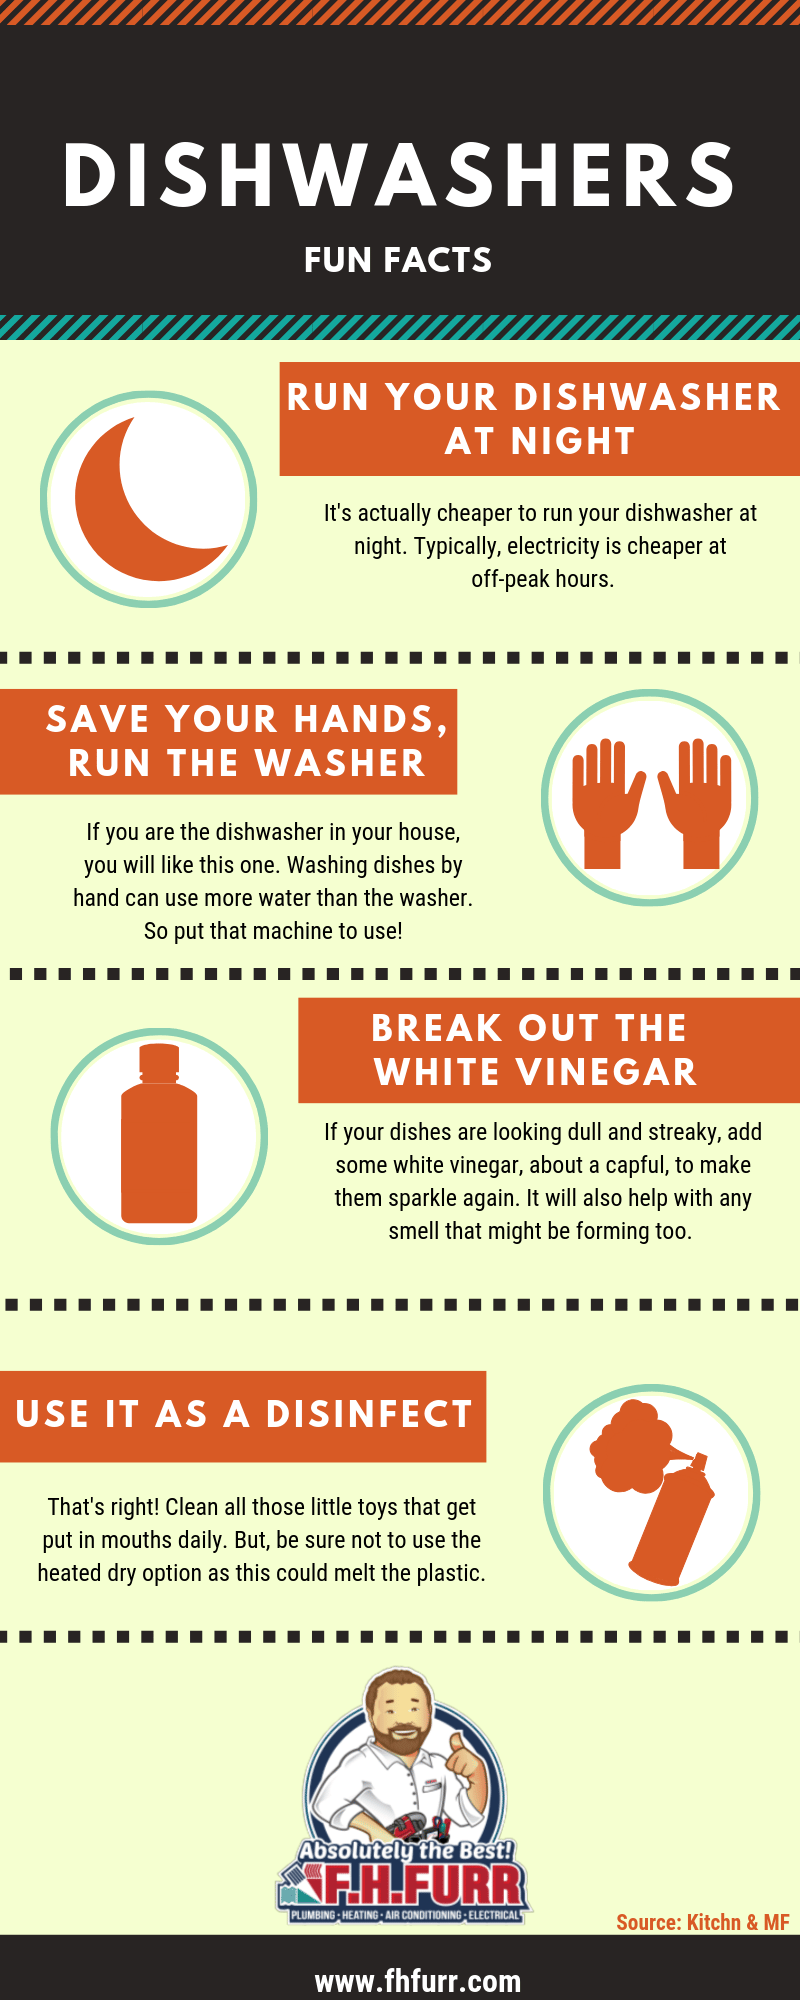 Infographic about dishwasher fun facts. F.H. Furr logo at bottom.